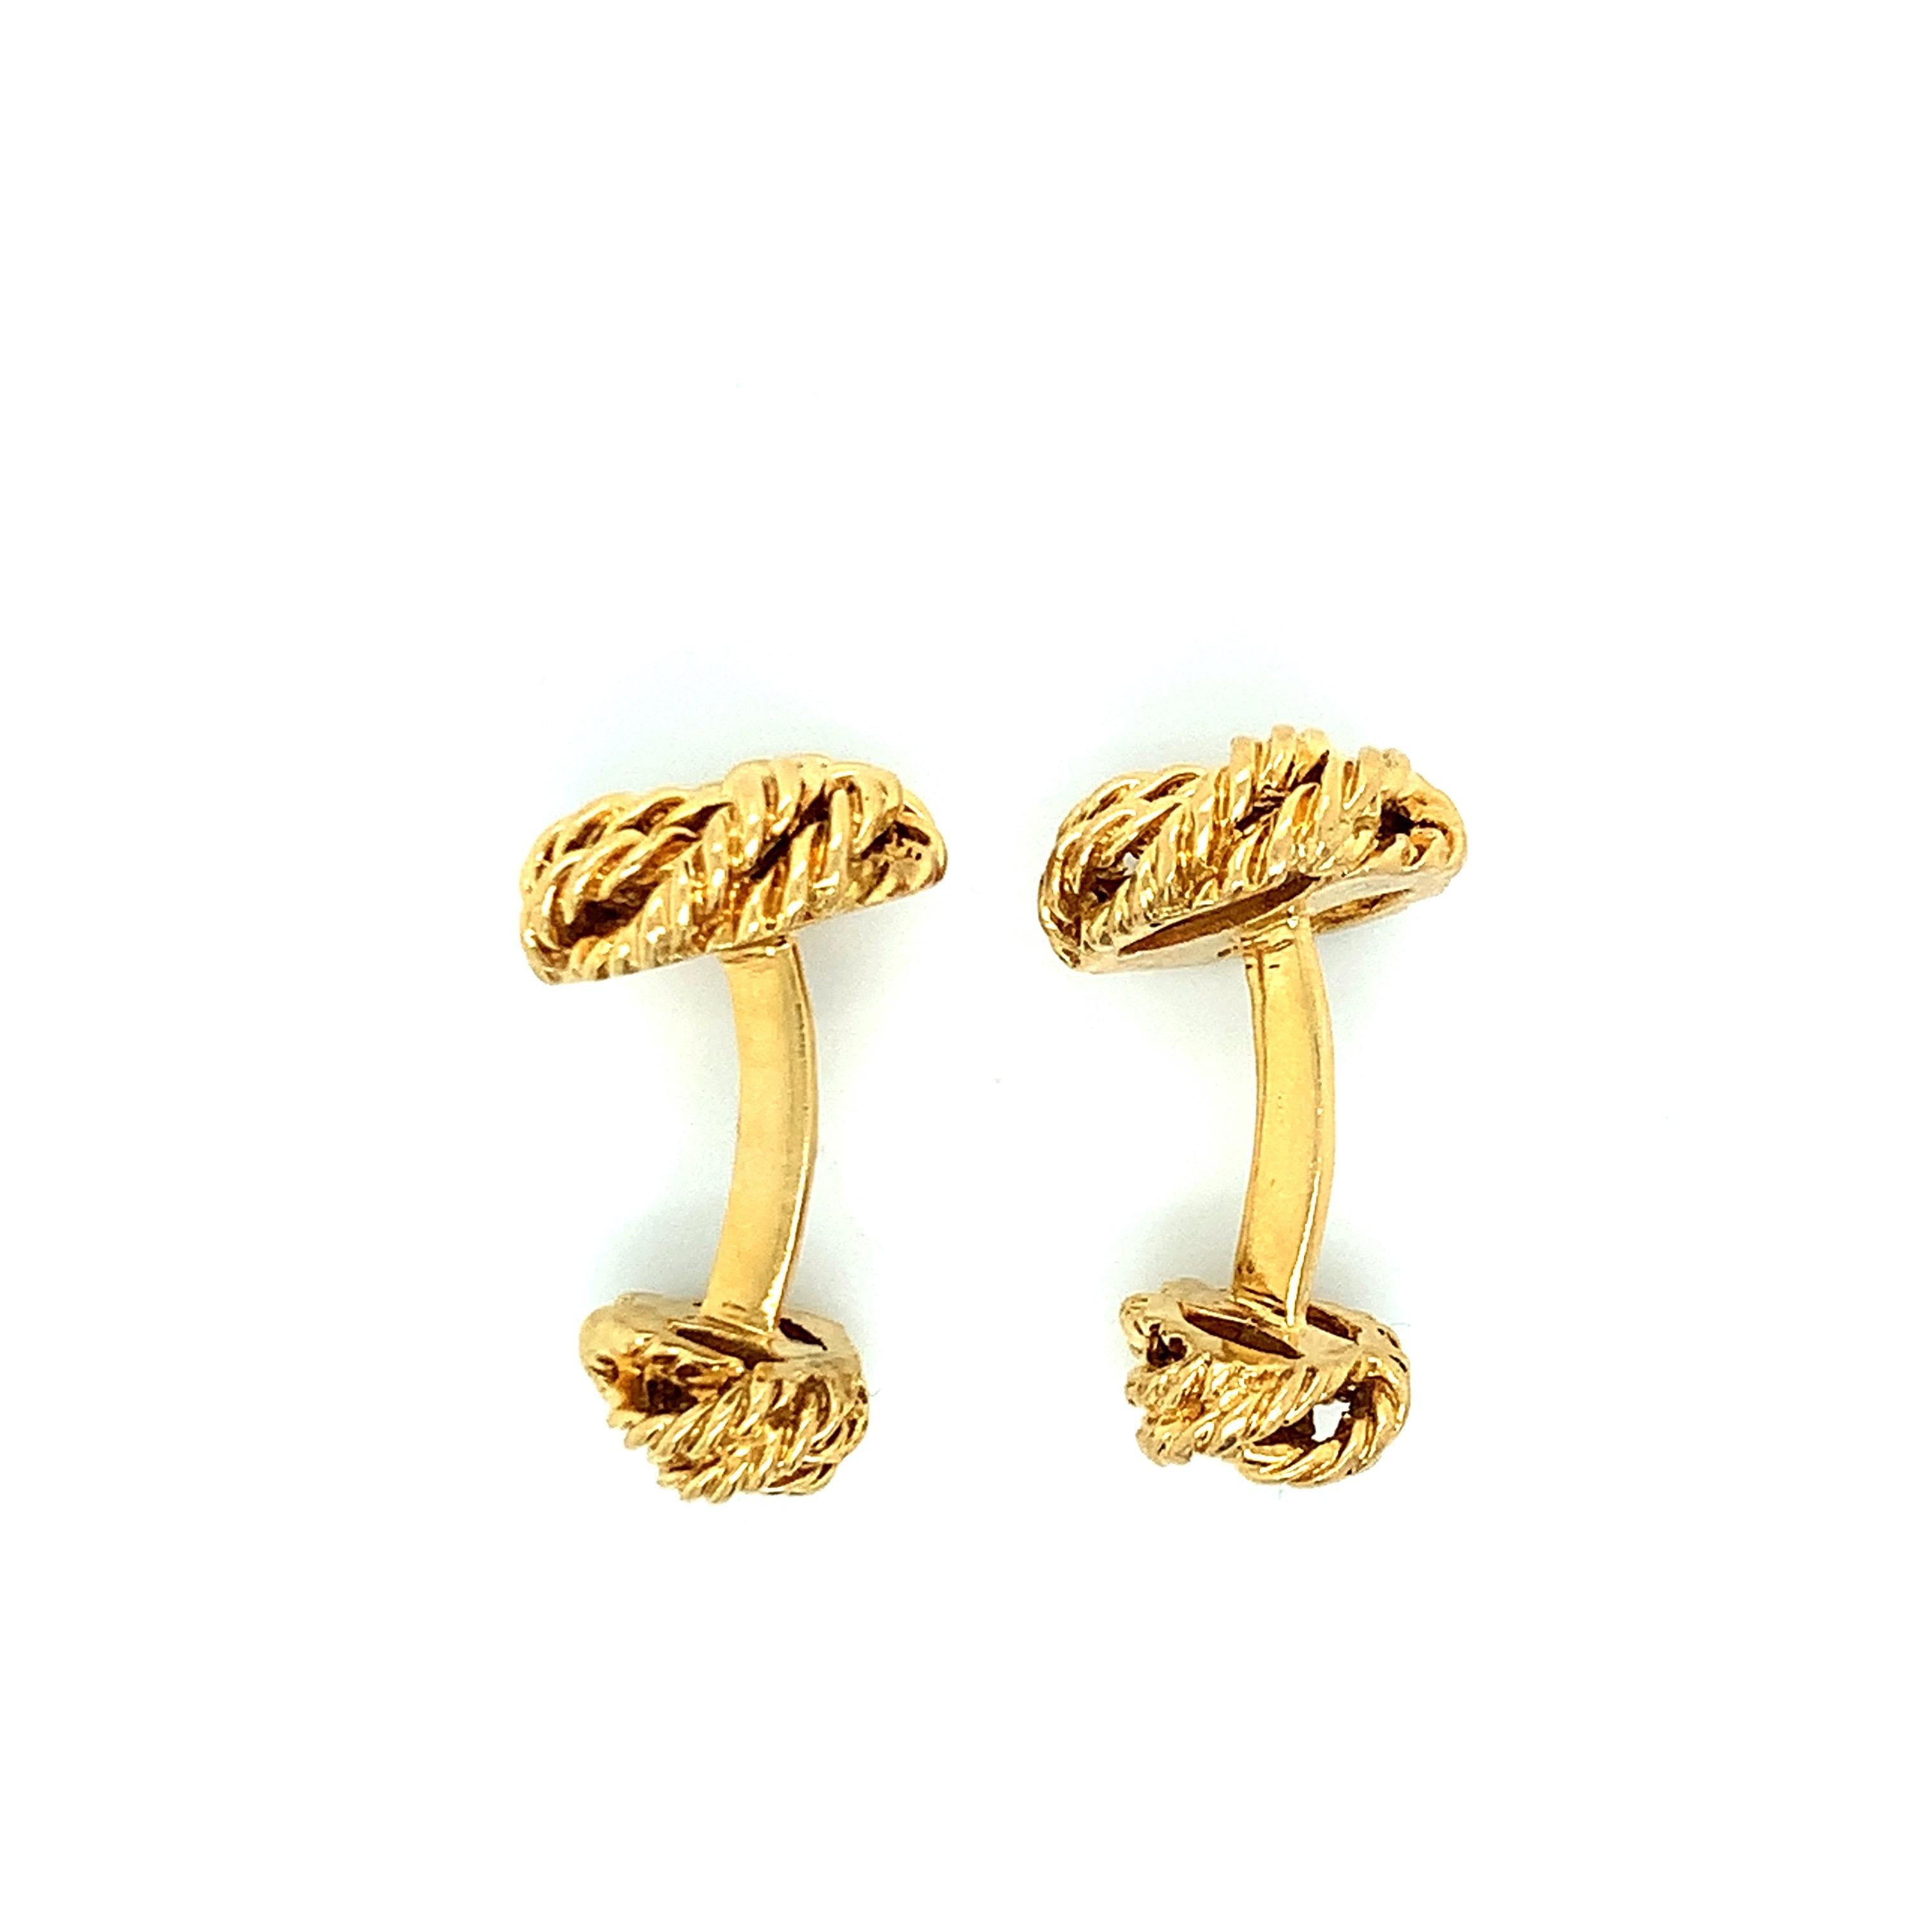 Tiffany & Co. 18 karat yellow gold cufflinks with ropes motif. The ropes' sizes on both ends are not the same. Both are marked: Tiffany & Co. / 18K. Total weight: 13.8 grams. Width: 1.4 cm. Length: 2.5 cm. 